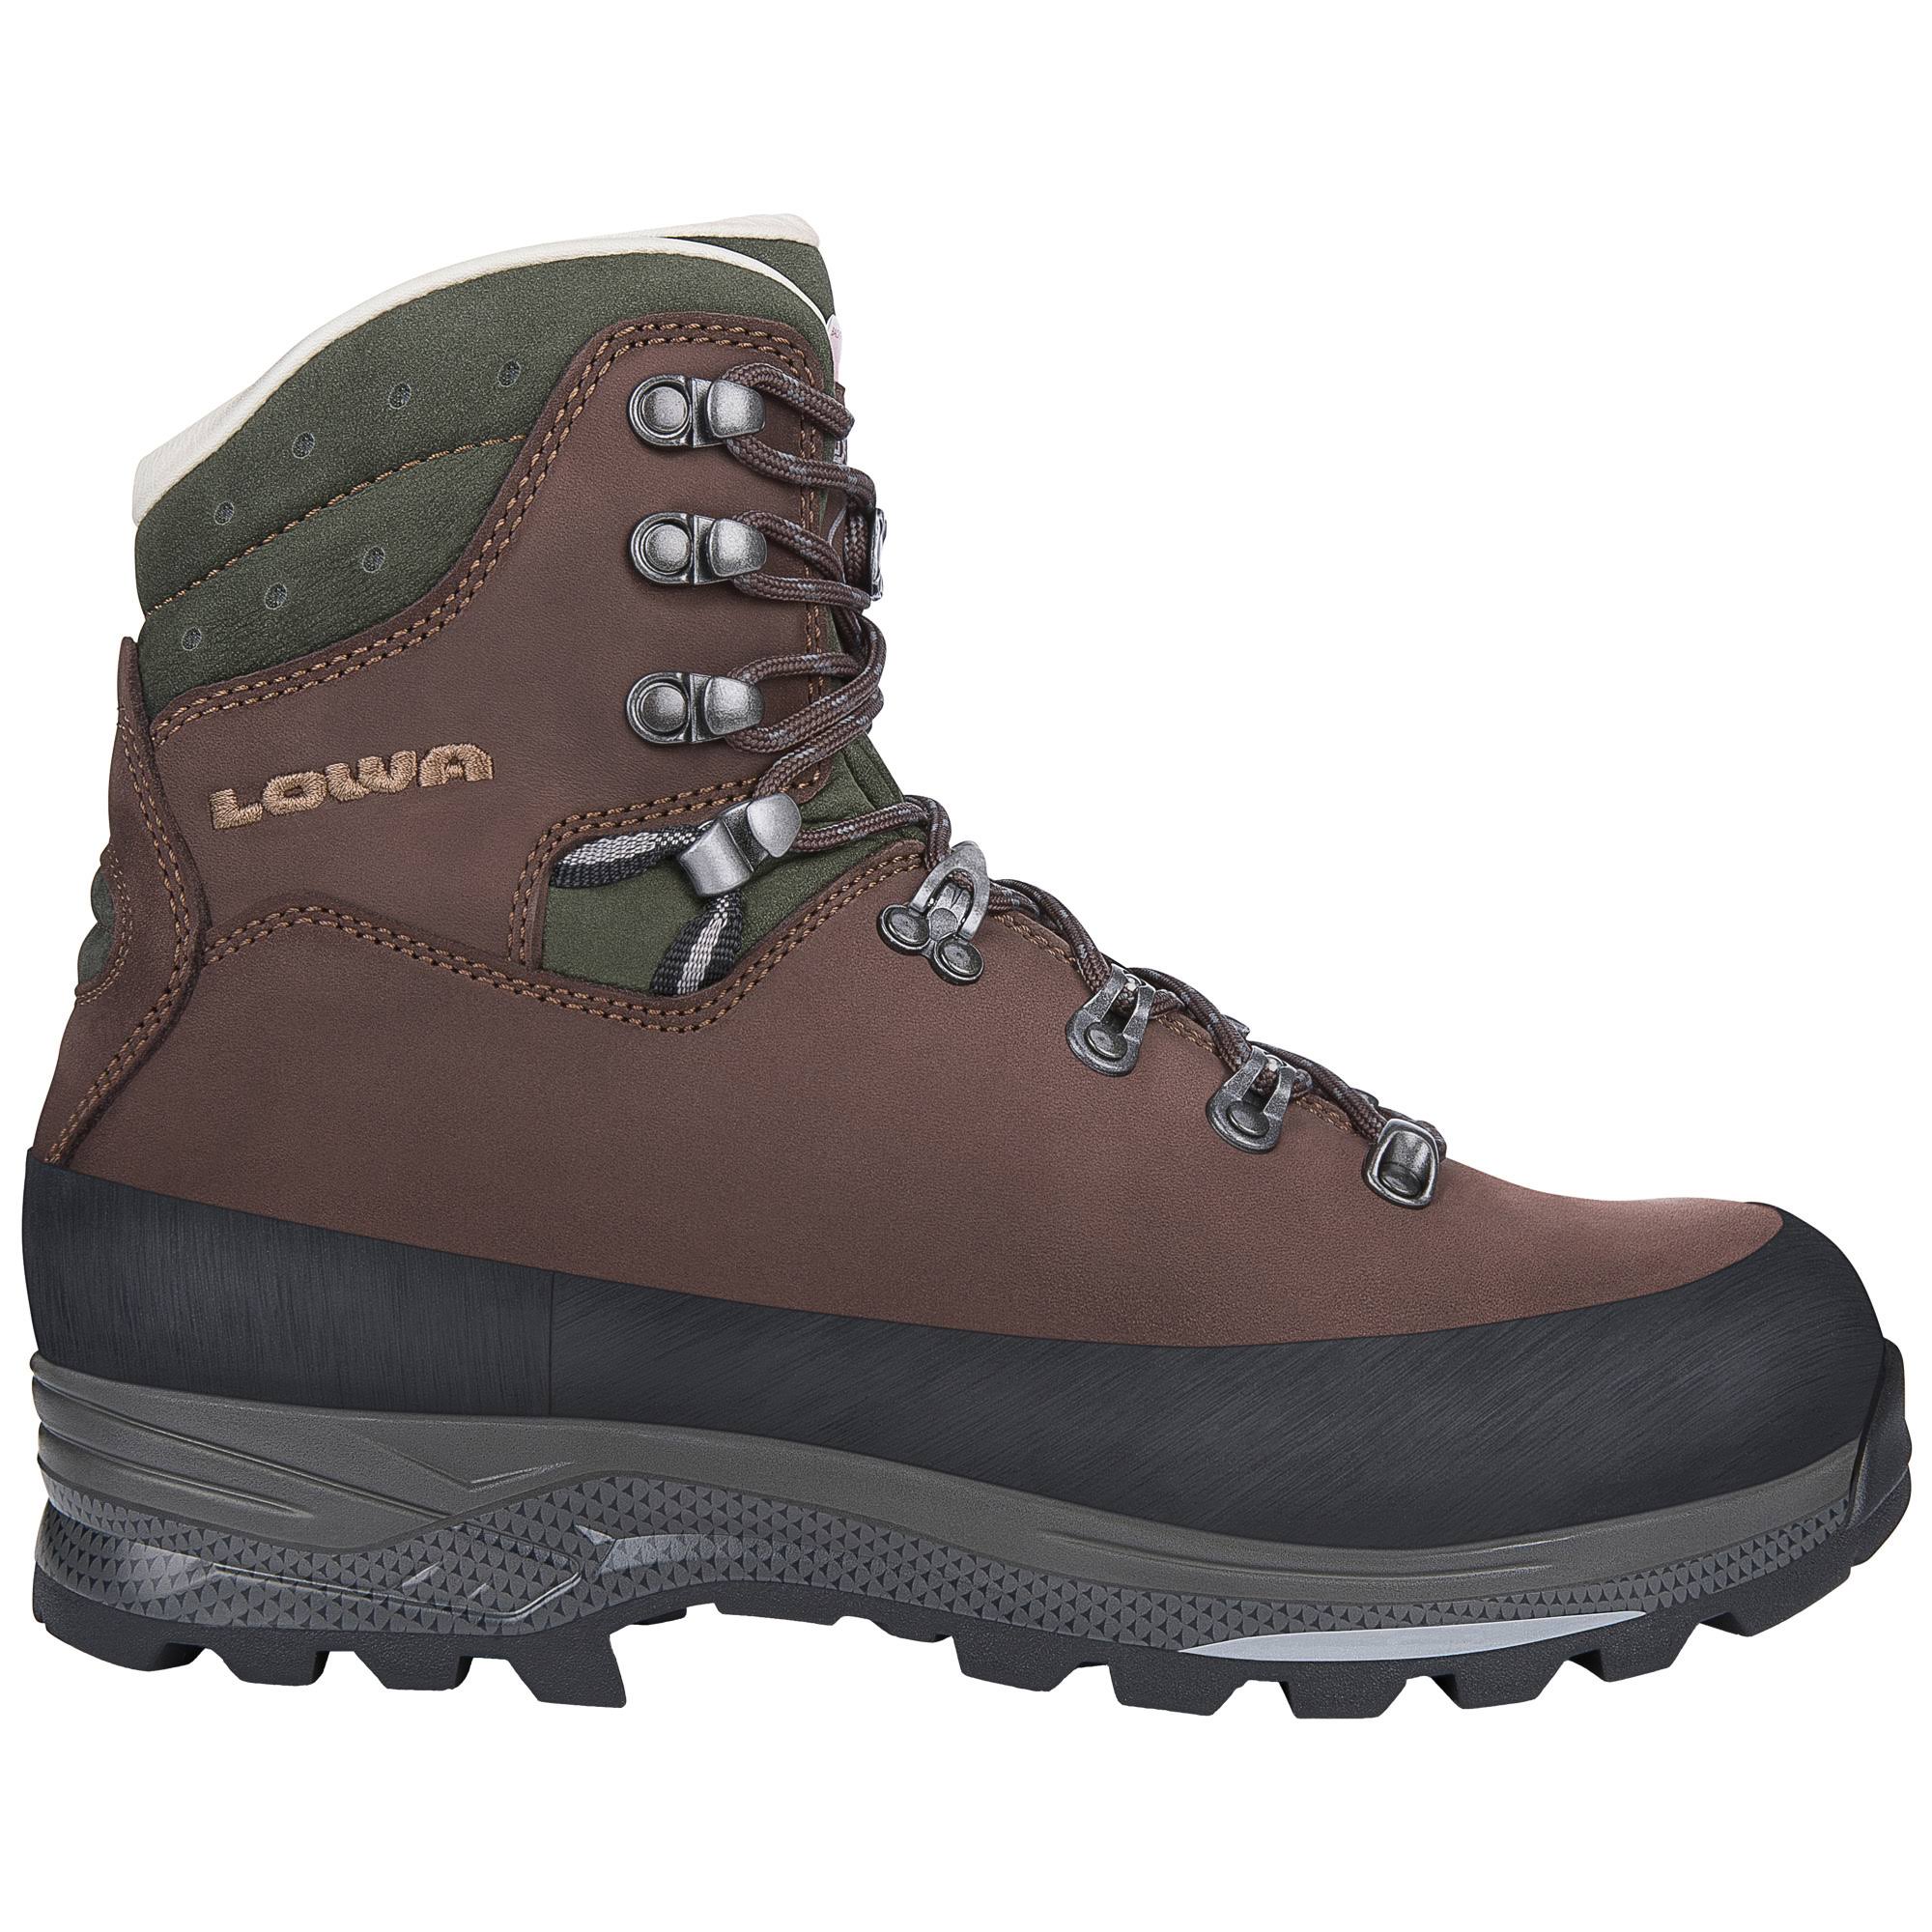 Lowa Men's Baffin Pro LL II Backpacking Boots - 10.5